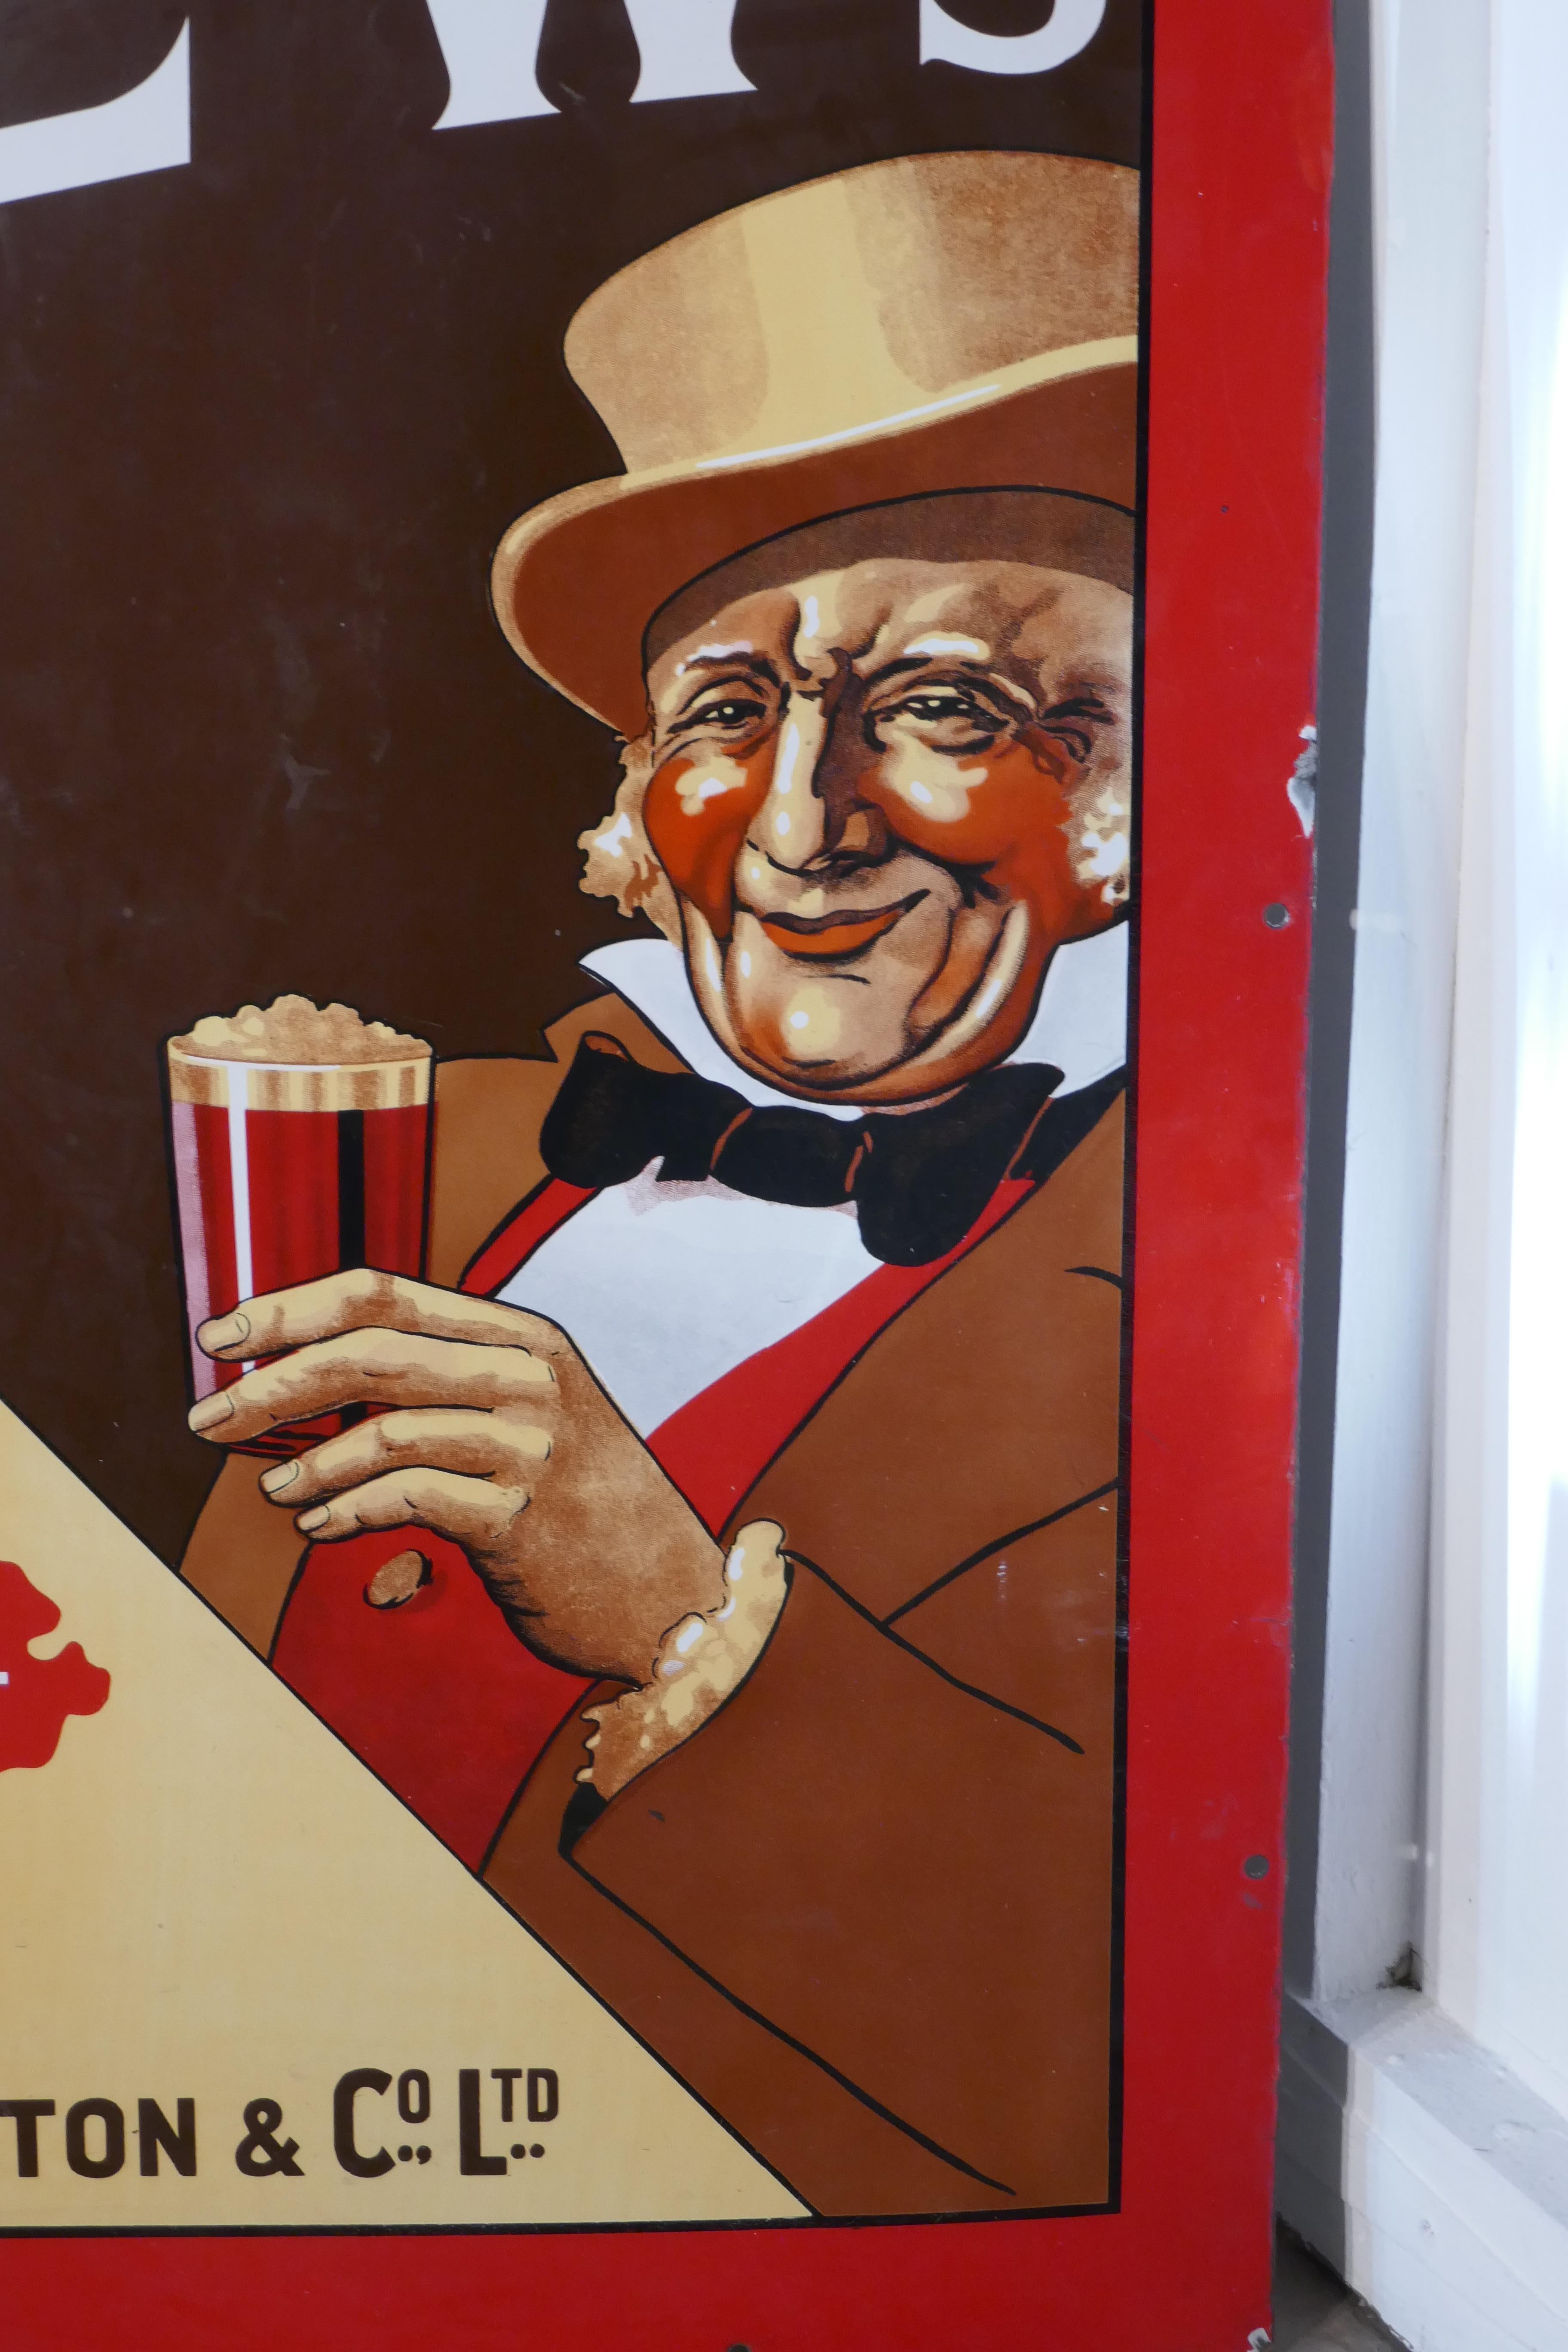 Vintage Mew Langton Original English Pub Sign, Jolly Dandy and Pint


Authentic English pub sign (one-sided) featuring a painting of a smiling Dandy who looks exactly like the famous John Bull, this sign is advertising the Mew Langton & Co Ltd